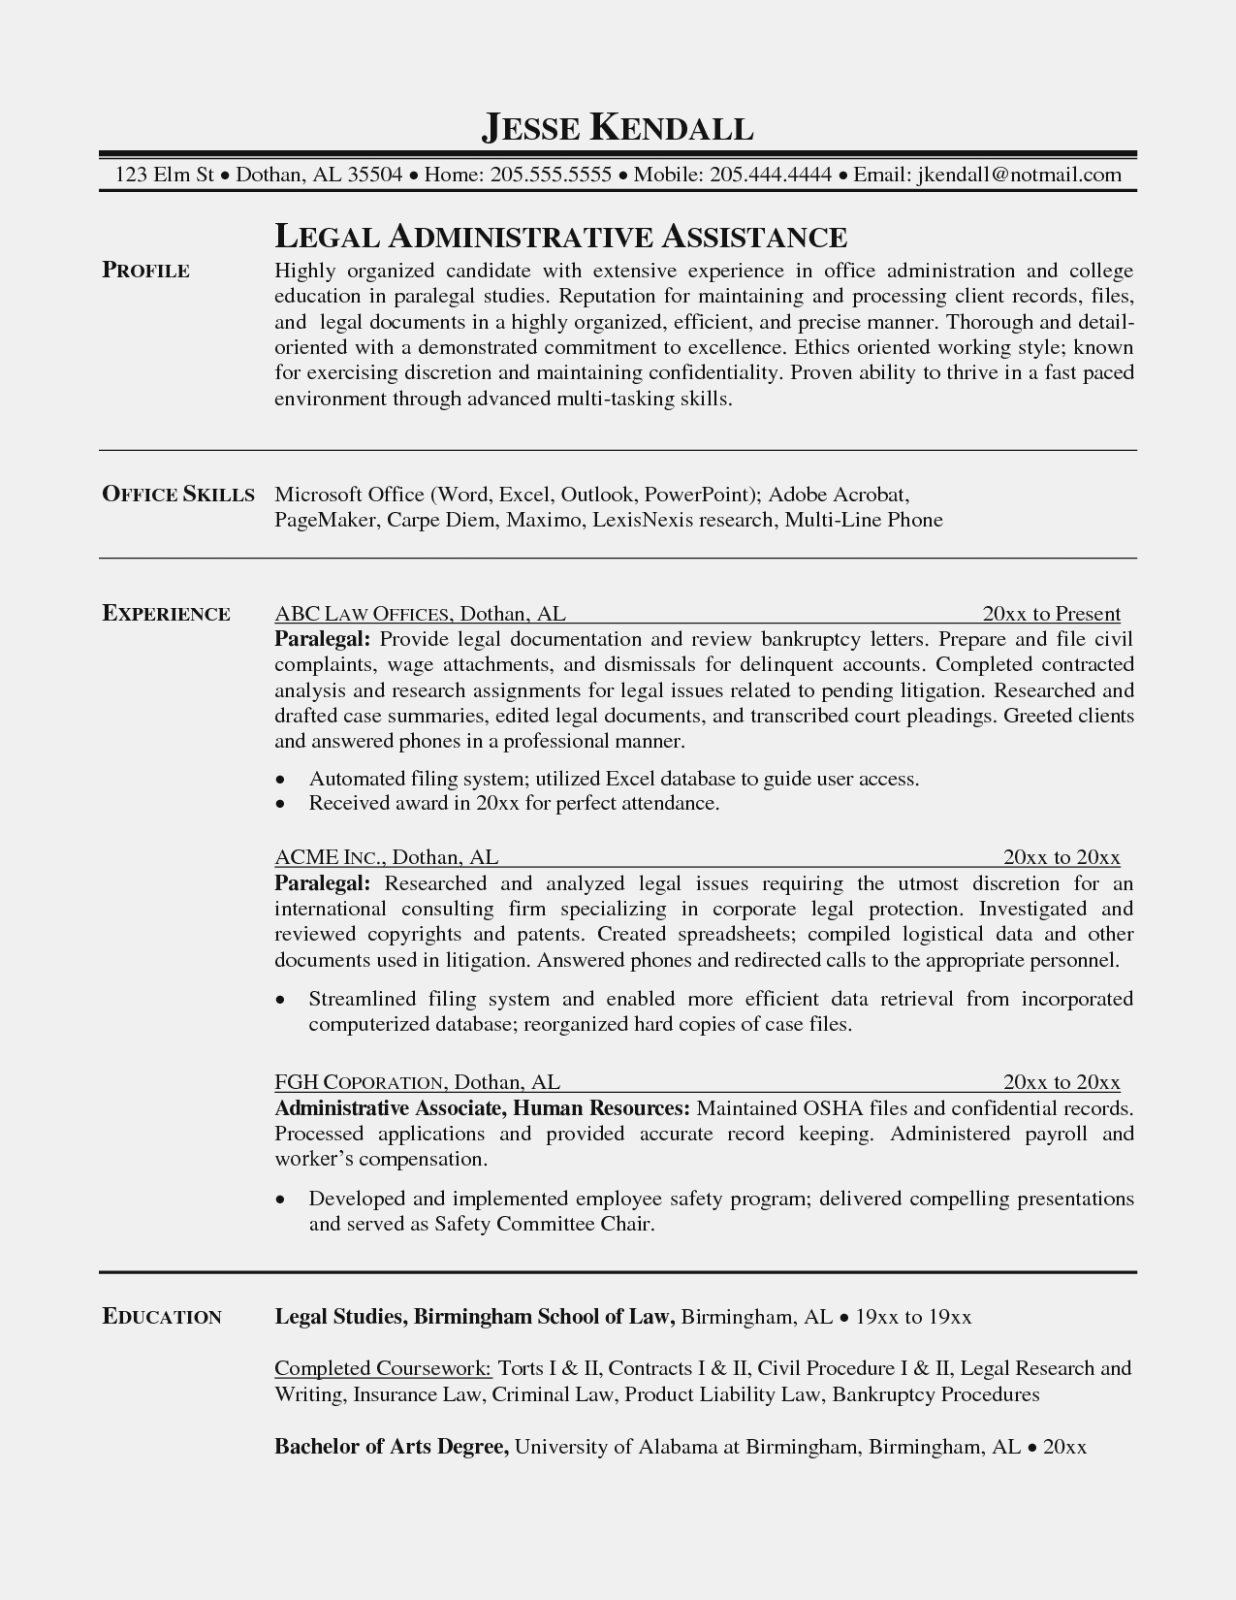 Paralegal Resume Sample 2019 Paralegal Resume Examples 2020 within measurements 1236 X 1600